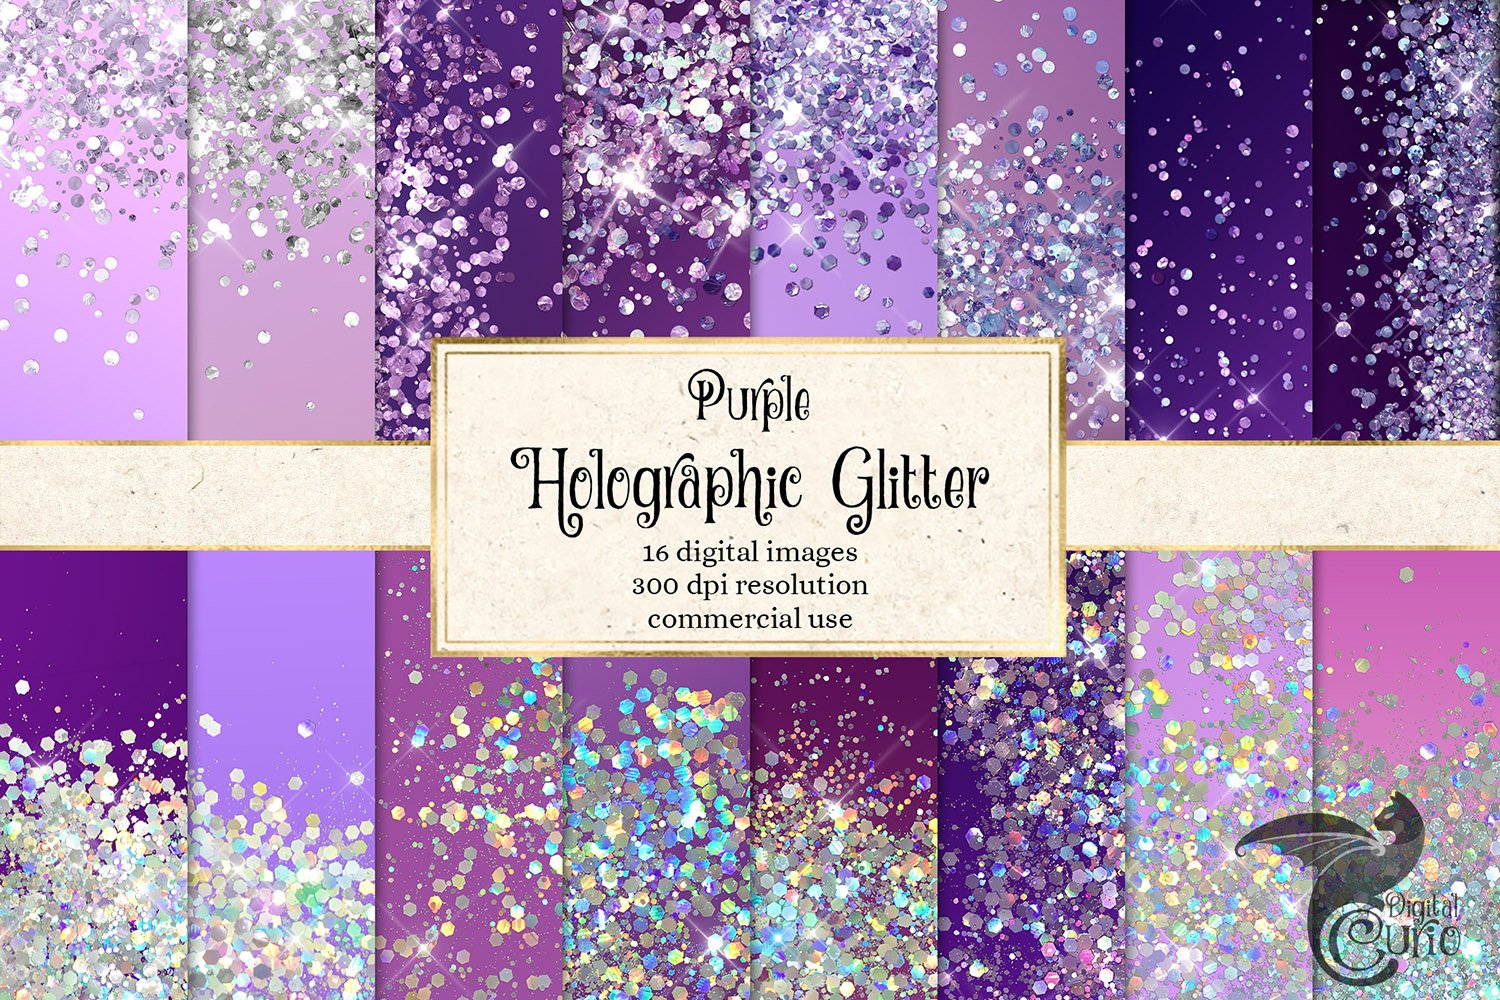 Holographic Glitter Backgrounds cover image.